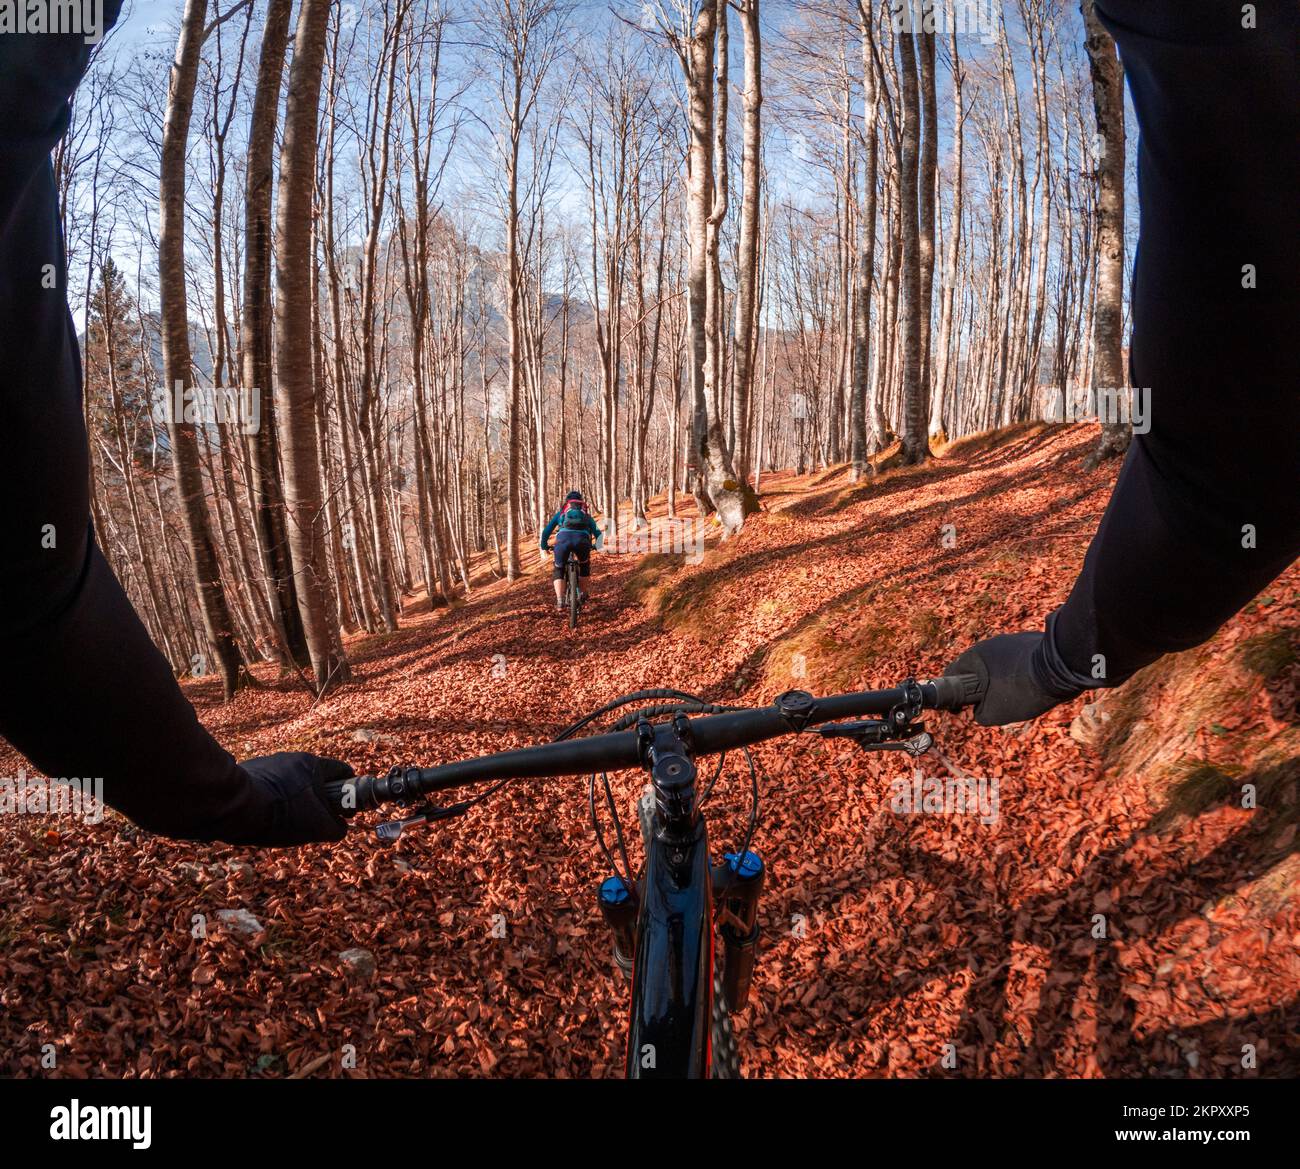 Personal perspective view of a person holding handlebars of a bike and a woman mountain biking ahead in fall foliage, Italy Stock Photo